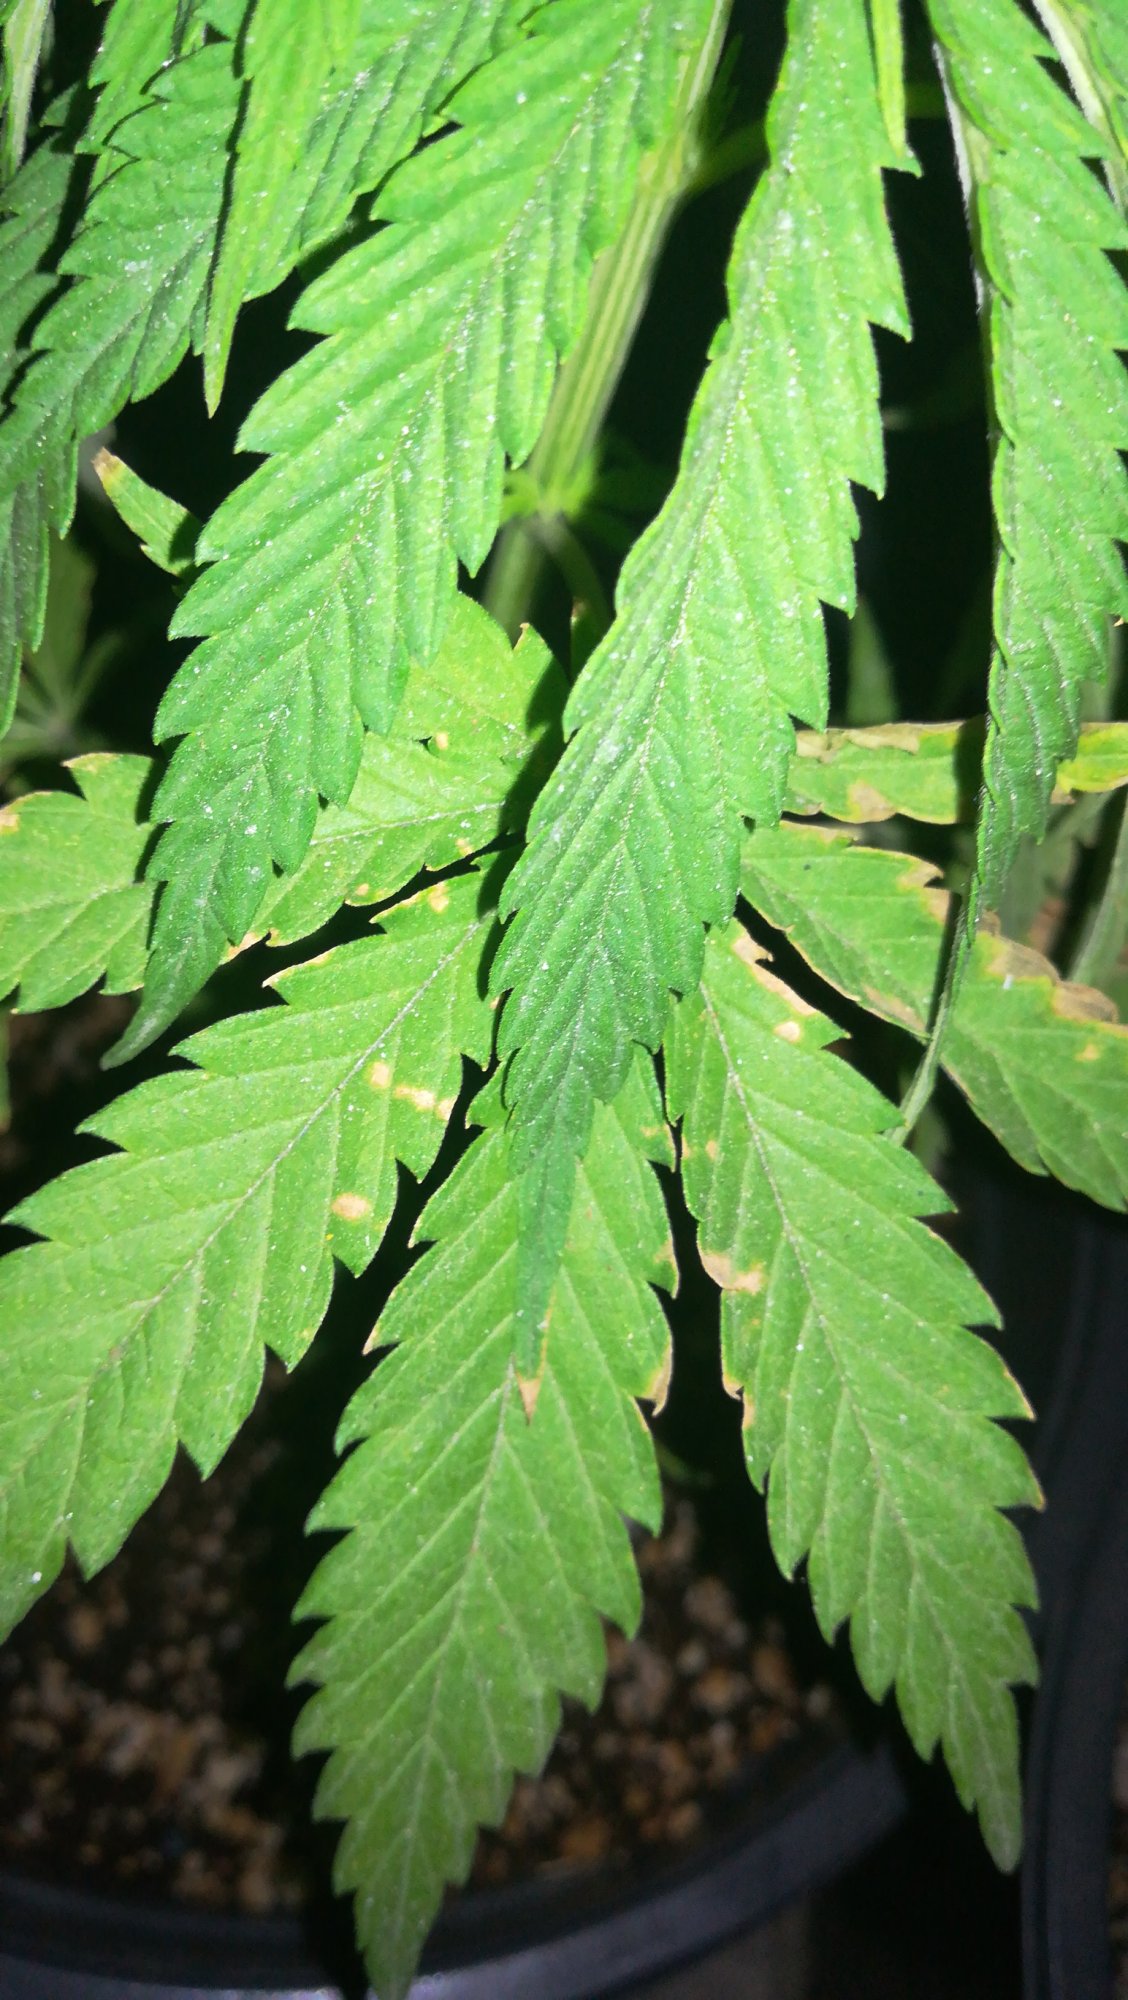 Black spots and yellowbrown spots on leaves